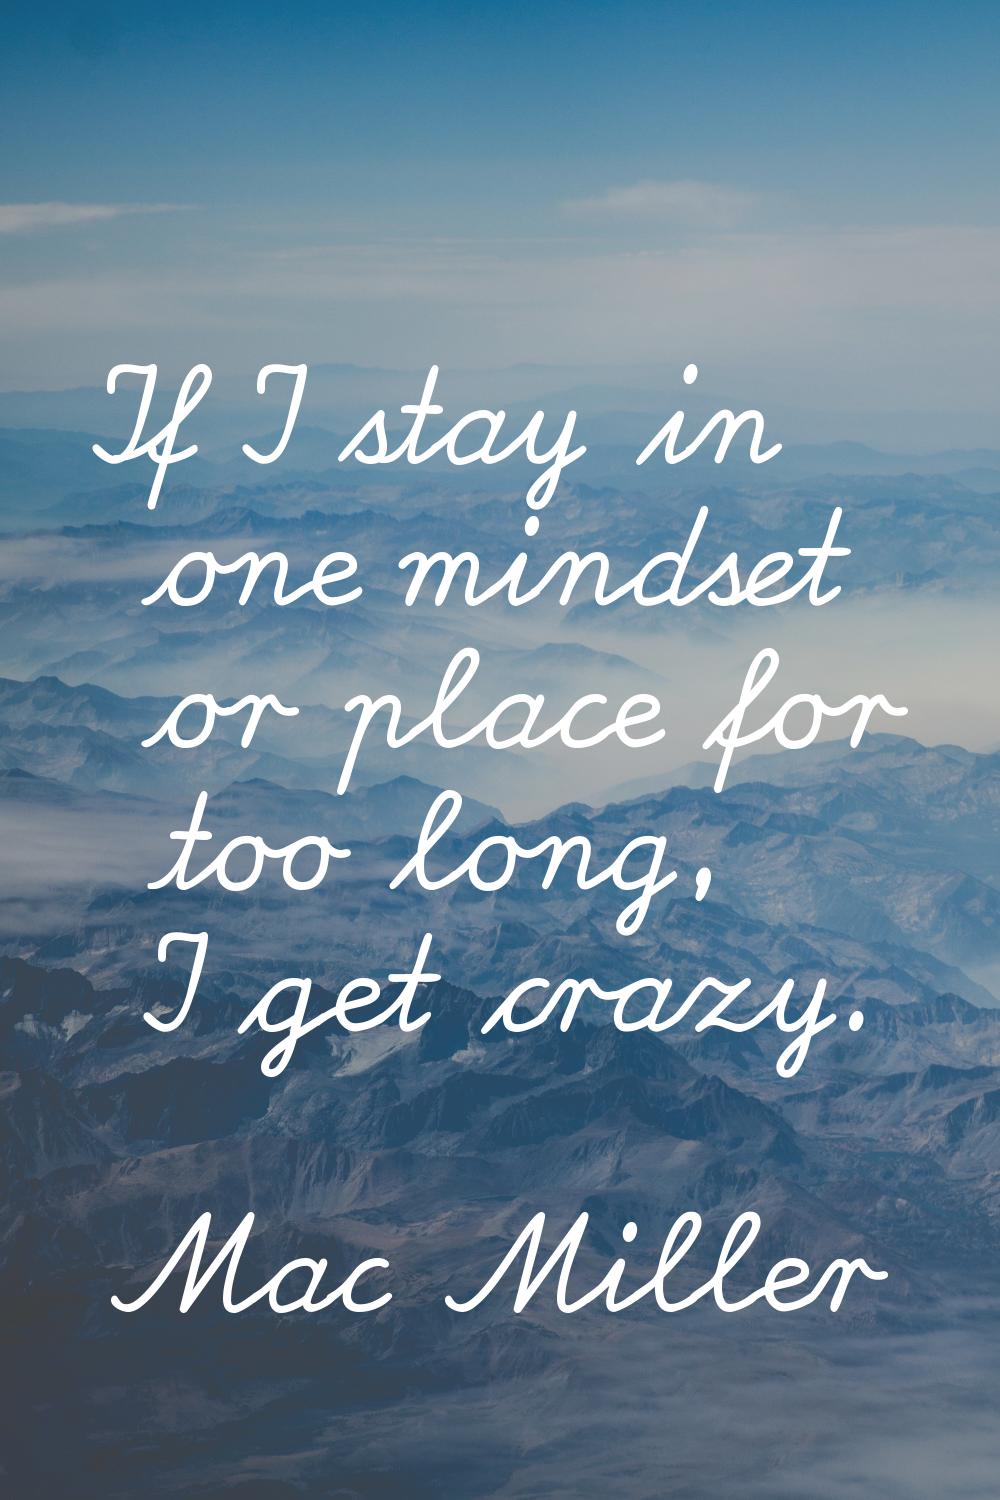 If I stay in one mindset or place for too long, I get crazy.